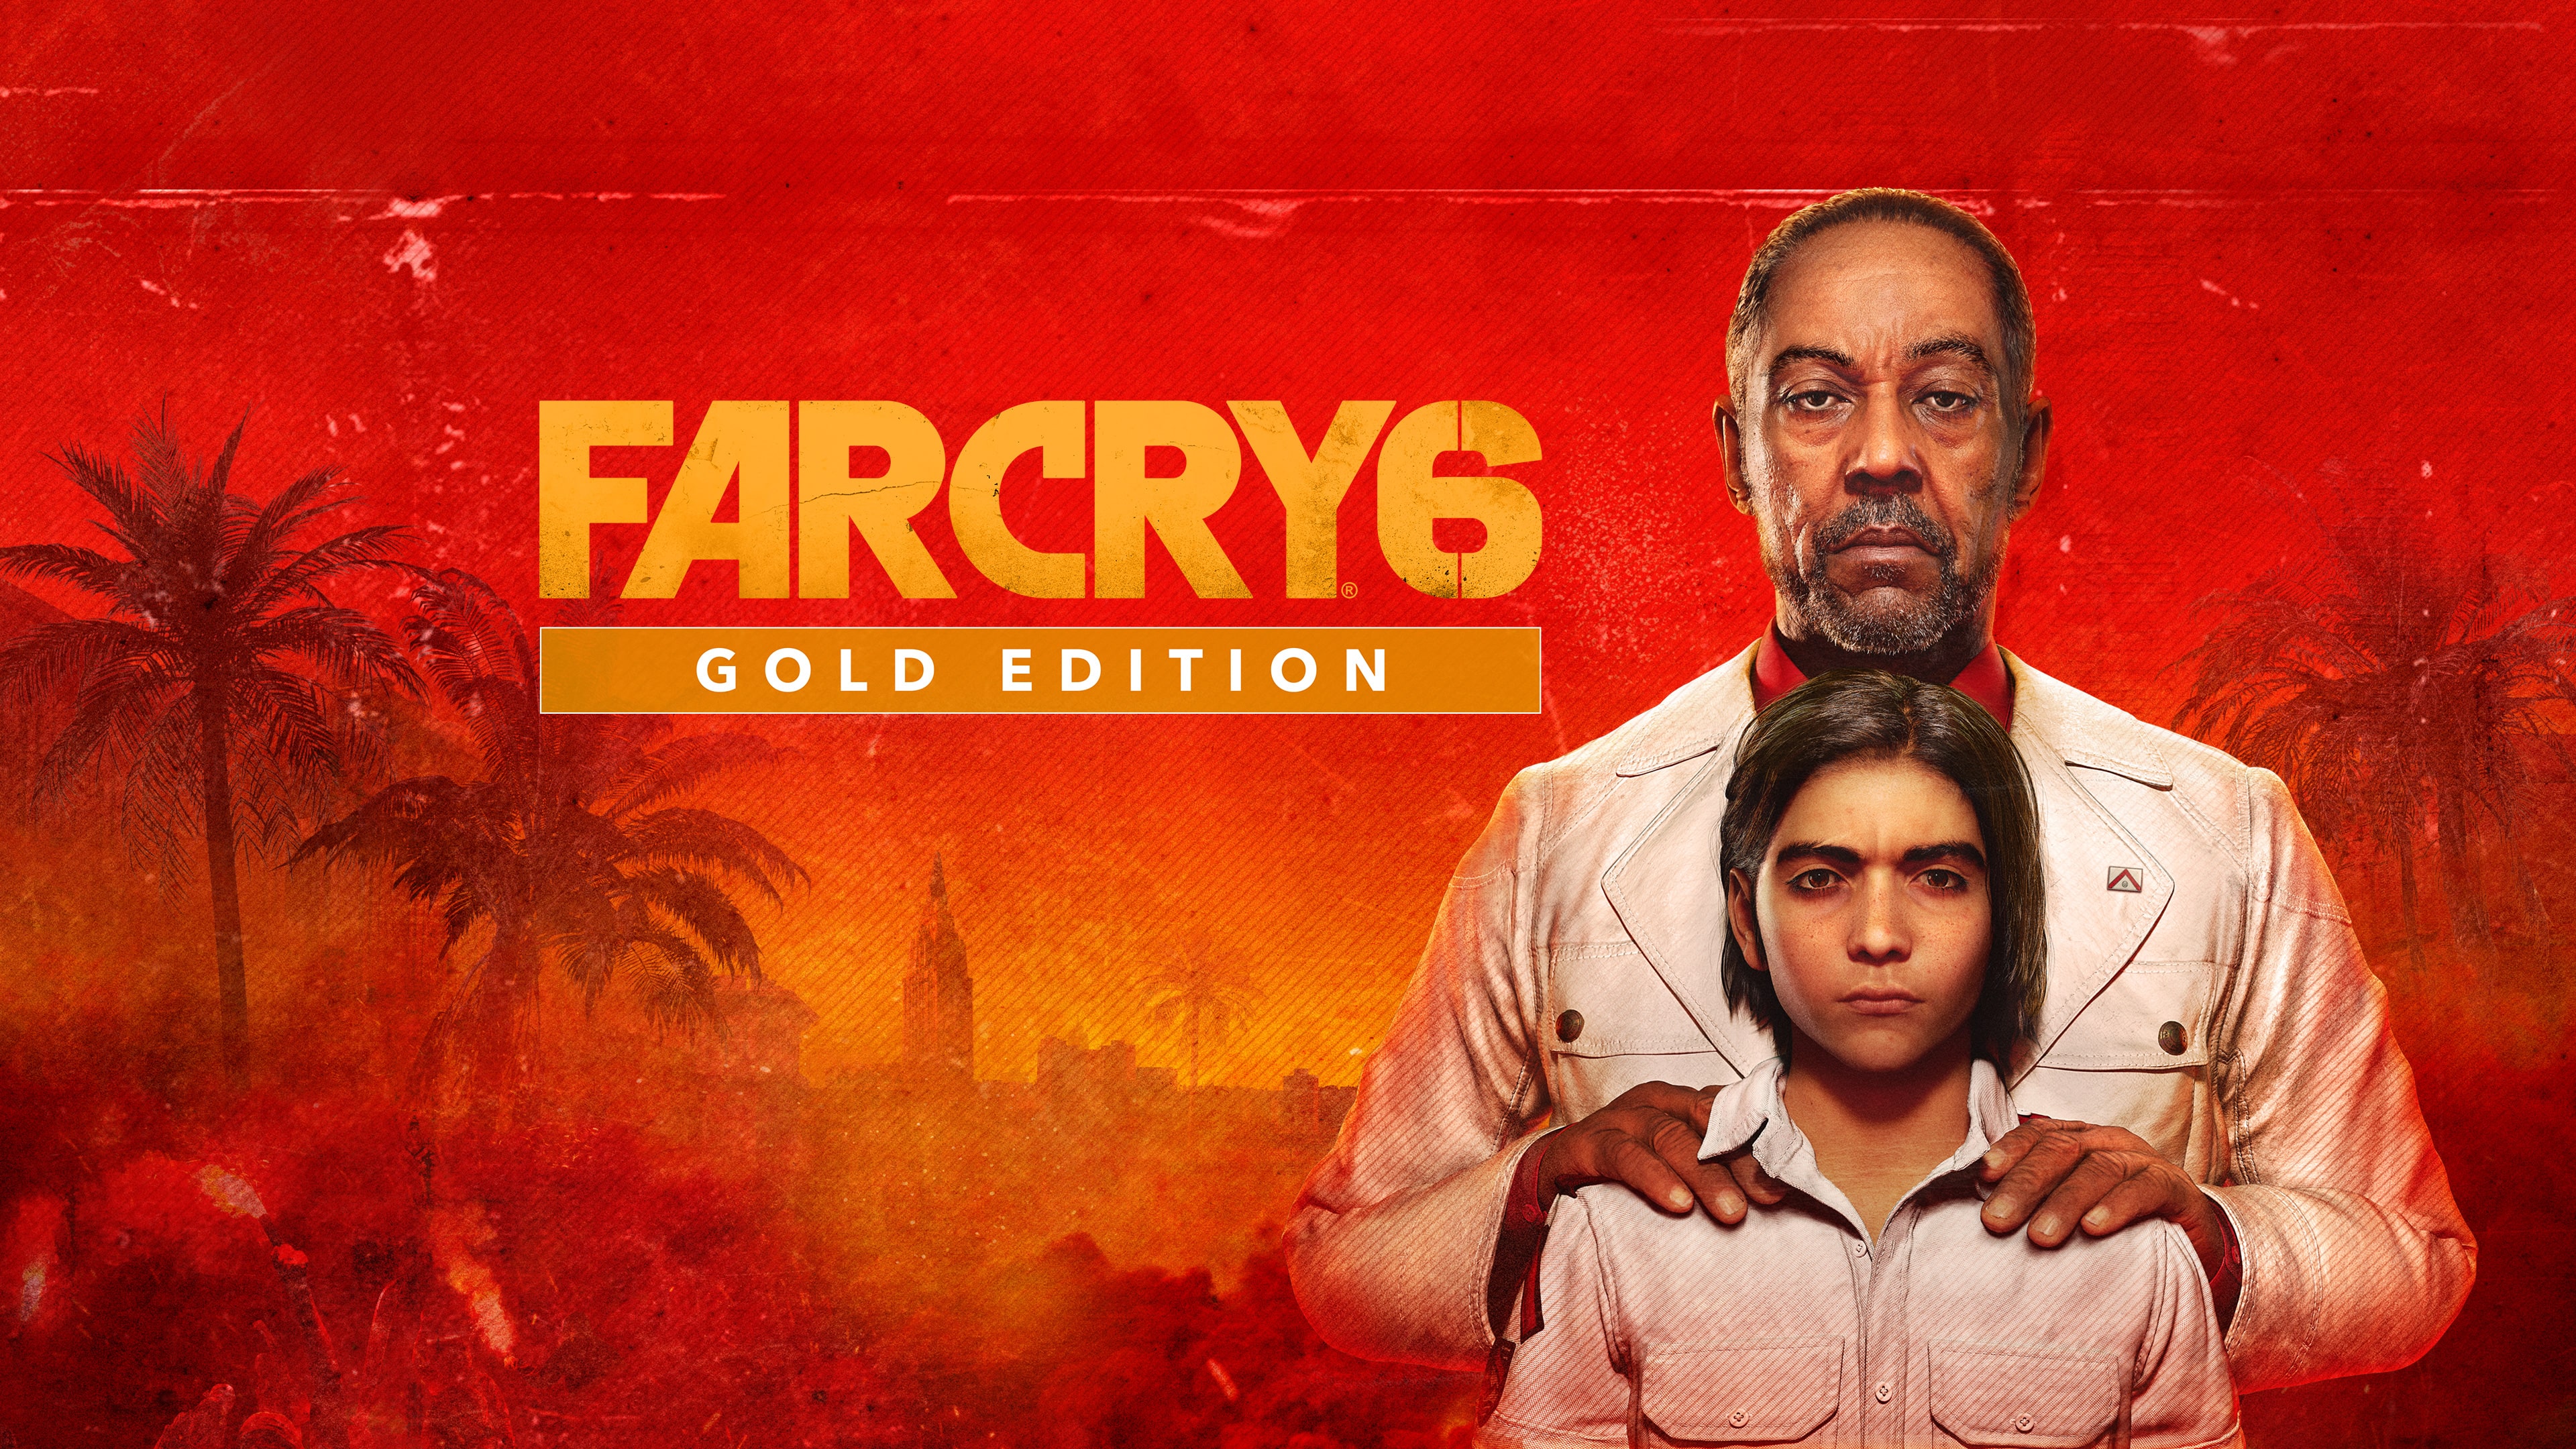 Far Cry 6 - Digital Gold Edition PS4 & PS5 (Simplified Chinese, English, Korean, Thai, Japanese, Traditional Chinese)